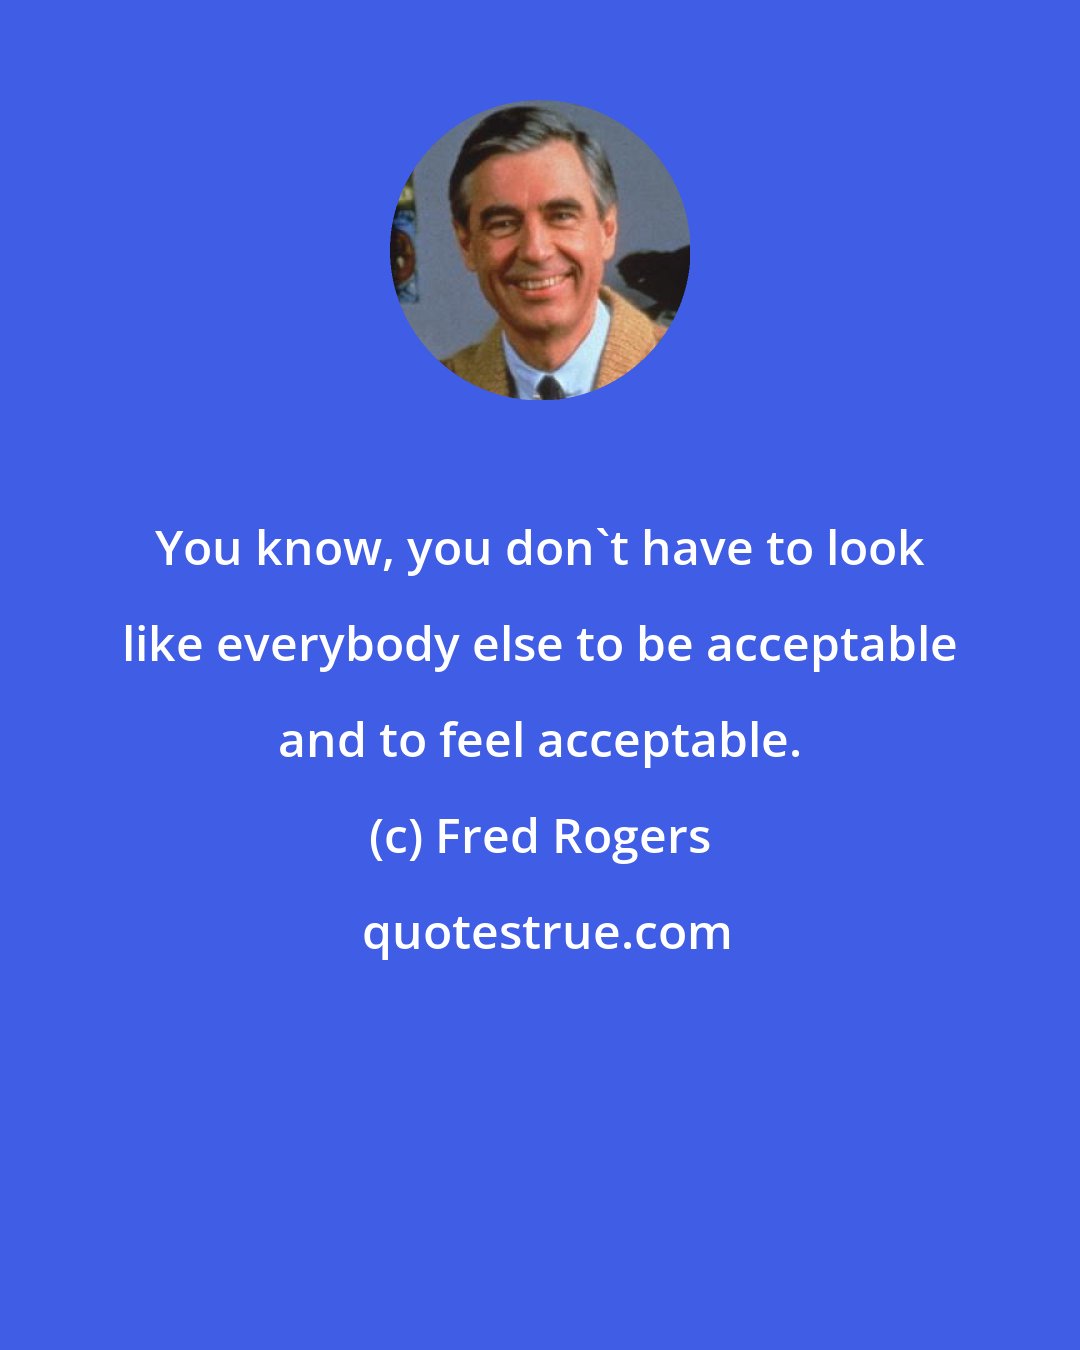 Fred Rogers: You know, you don't have to look like everybody else to be acceptable and to feel acceptable.